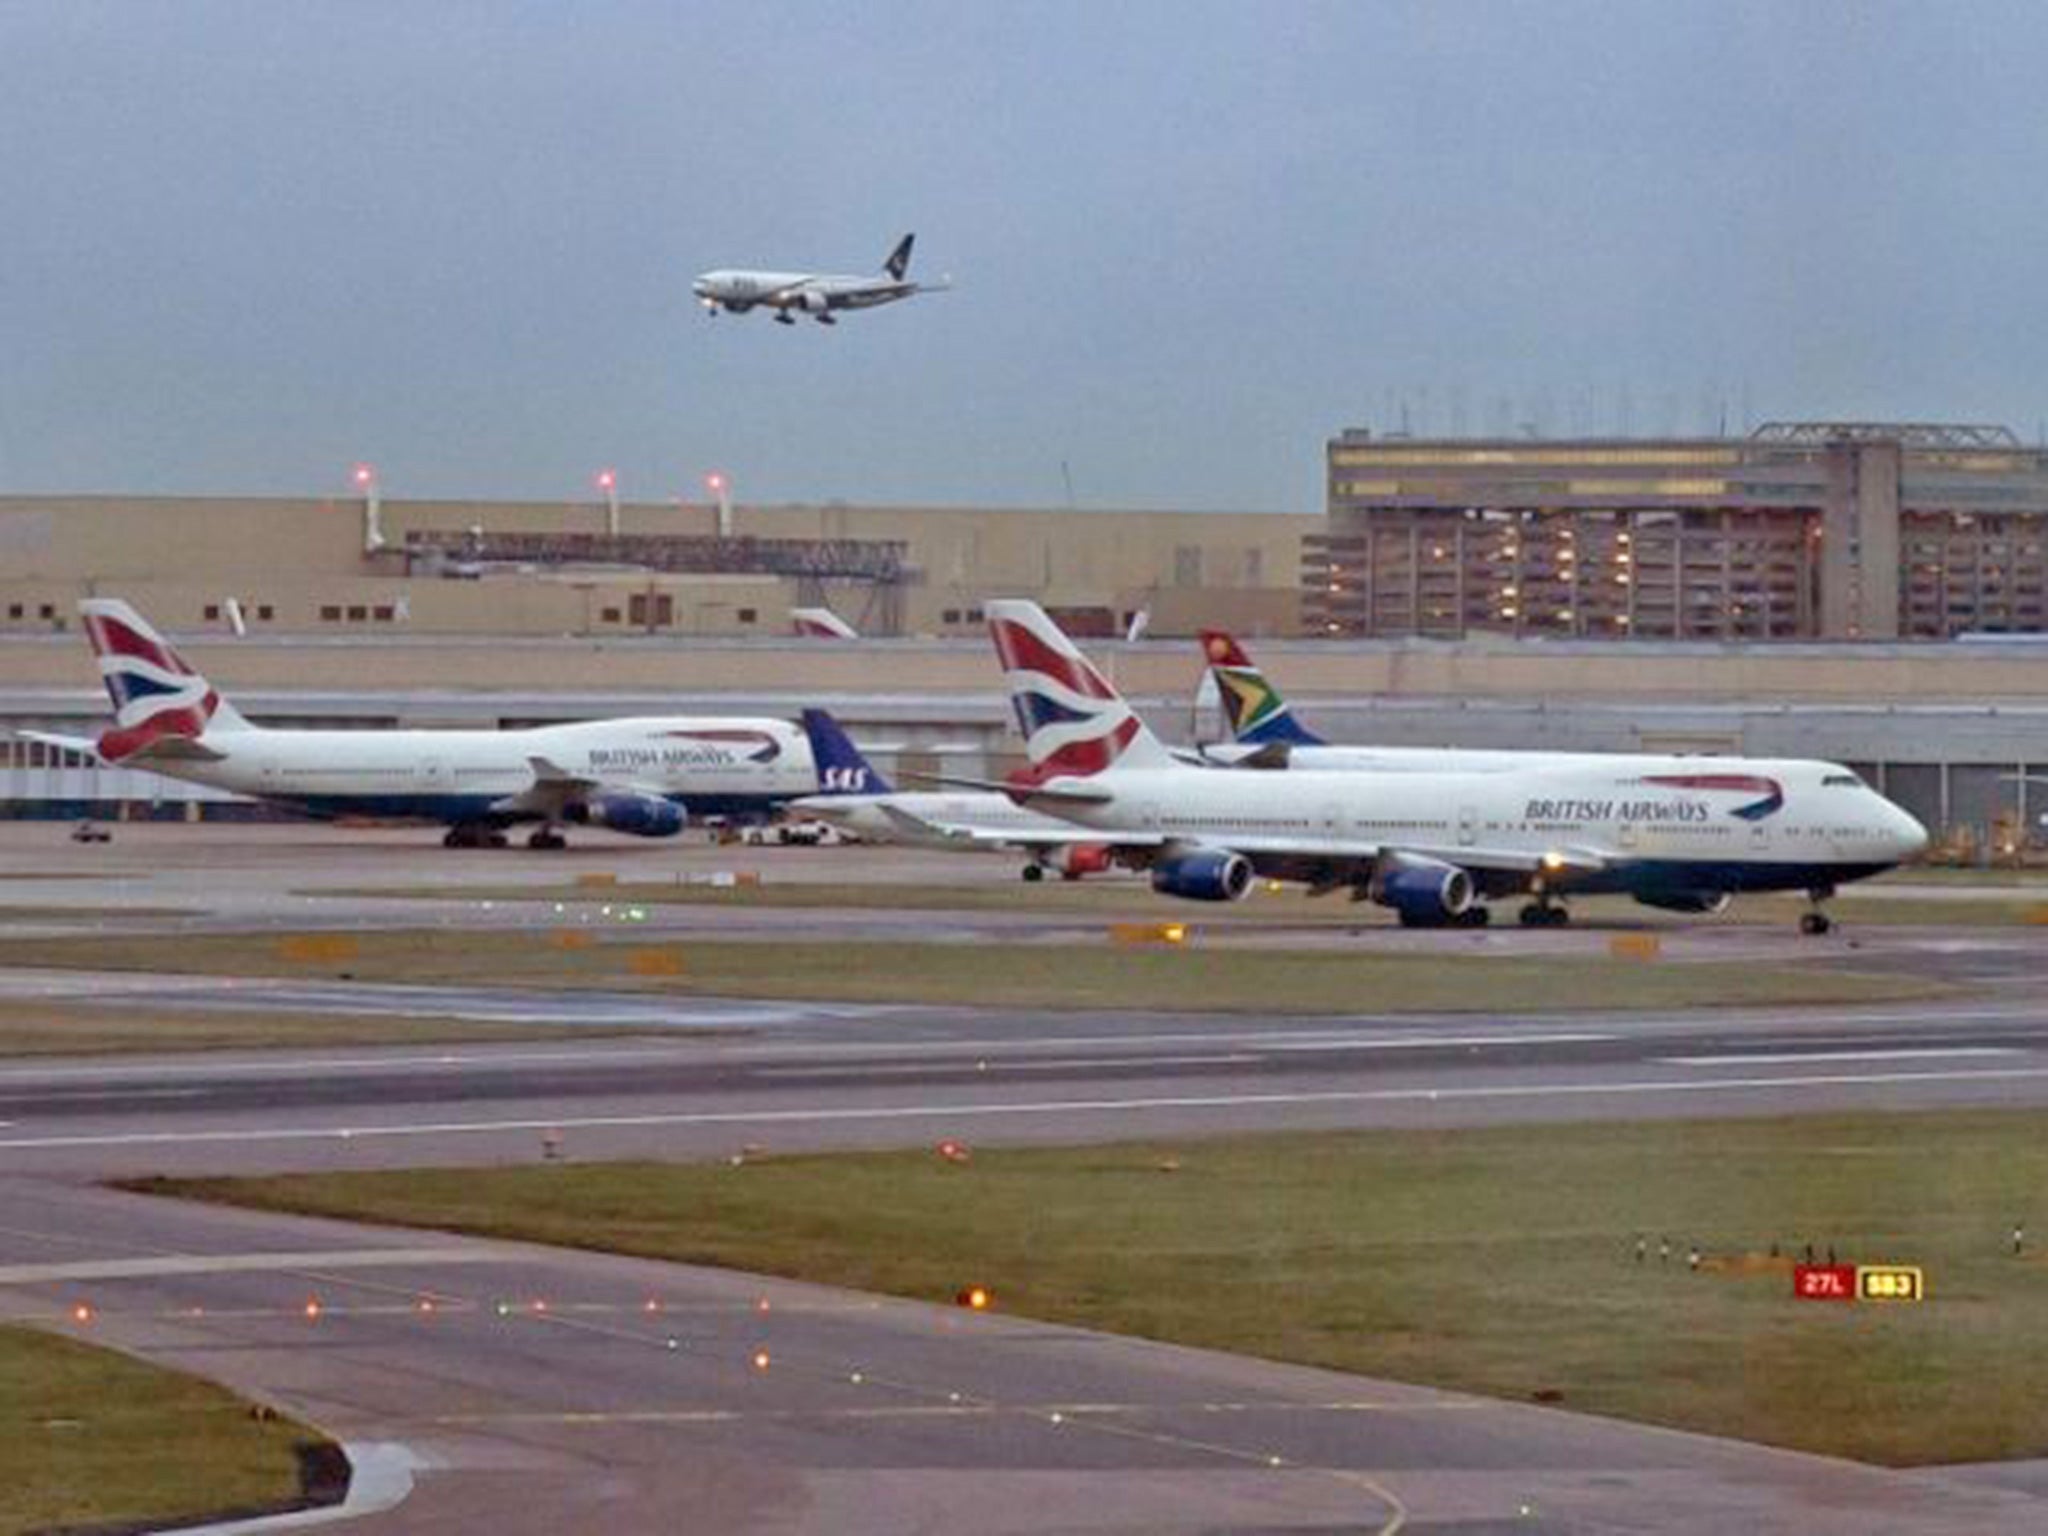 Sir Howard Davies’ Airports Commission unanimously recommended a third runway be built at Heathrow